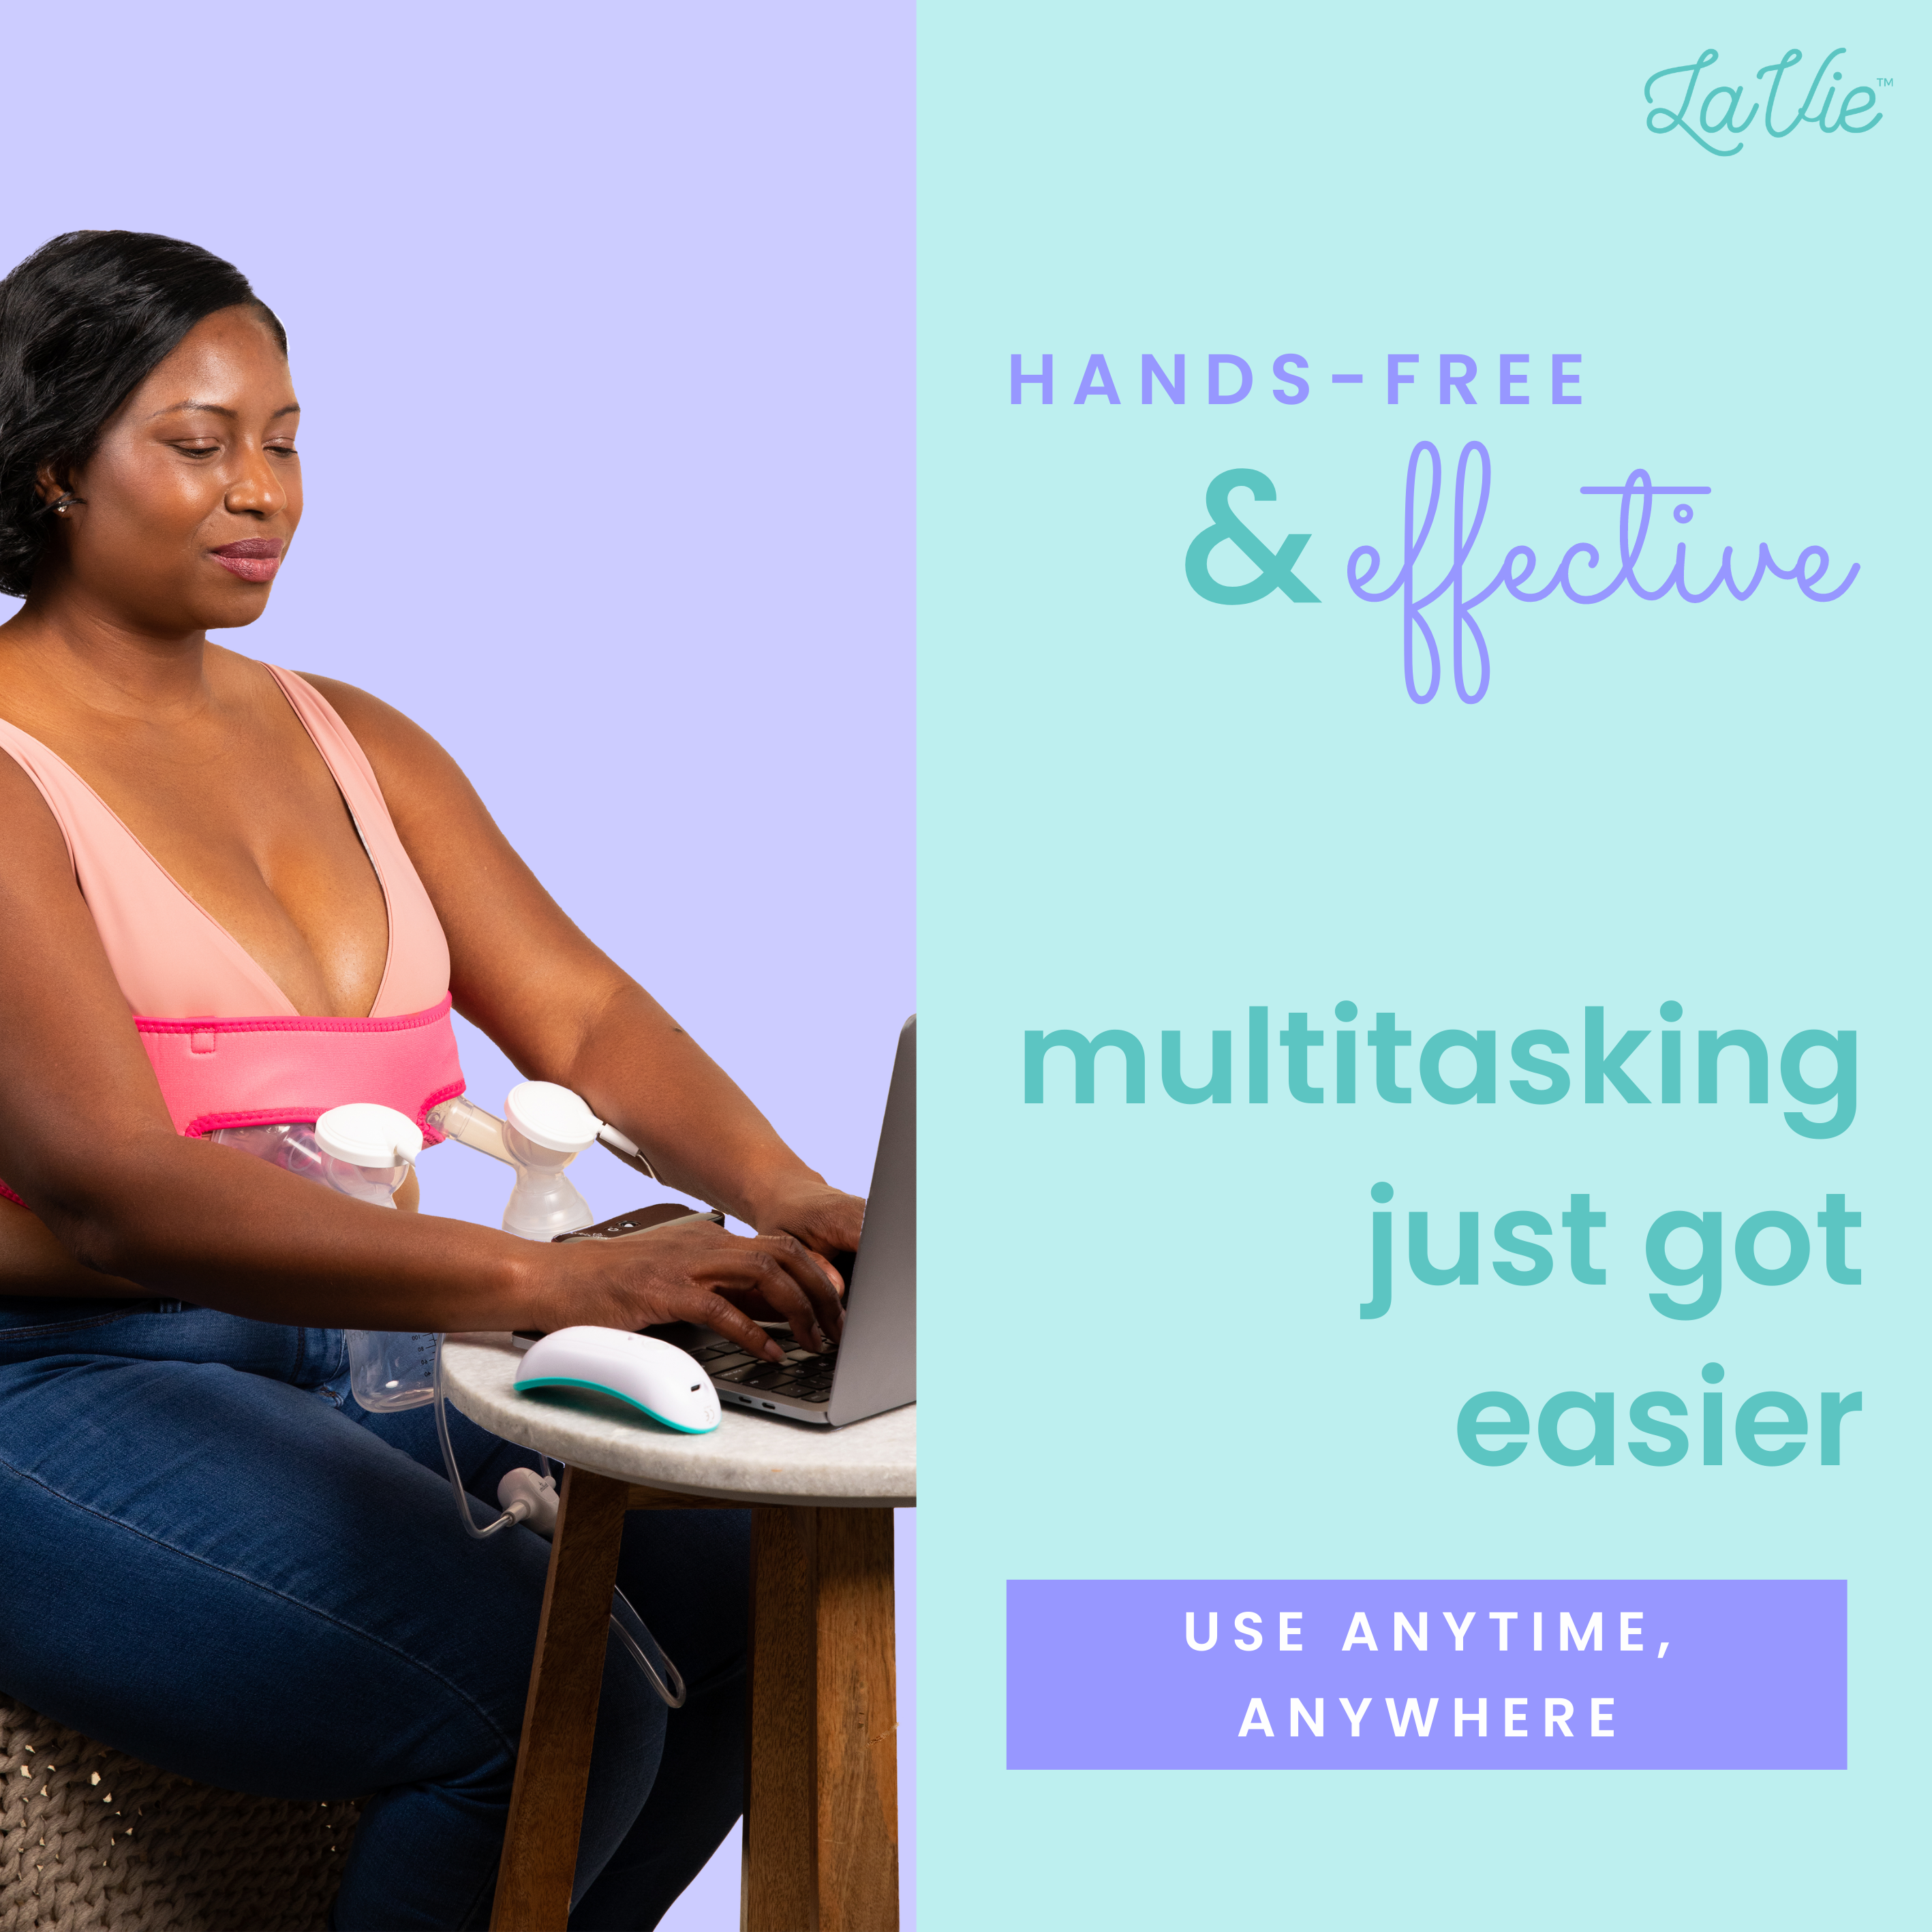 Grownsy Warming Lactation Massage Pads Heat and Vibration Improve Milk Flow  - Helia Beer Co